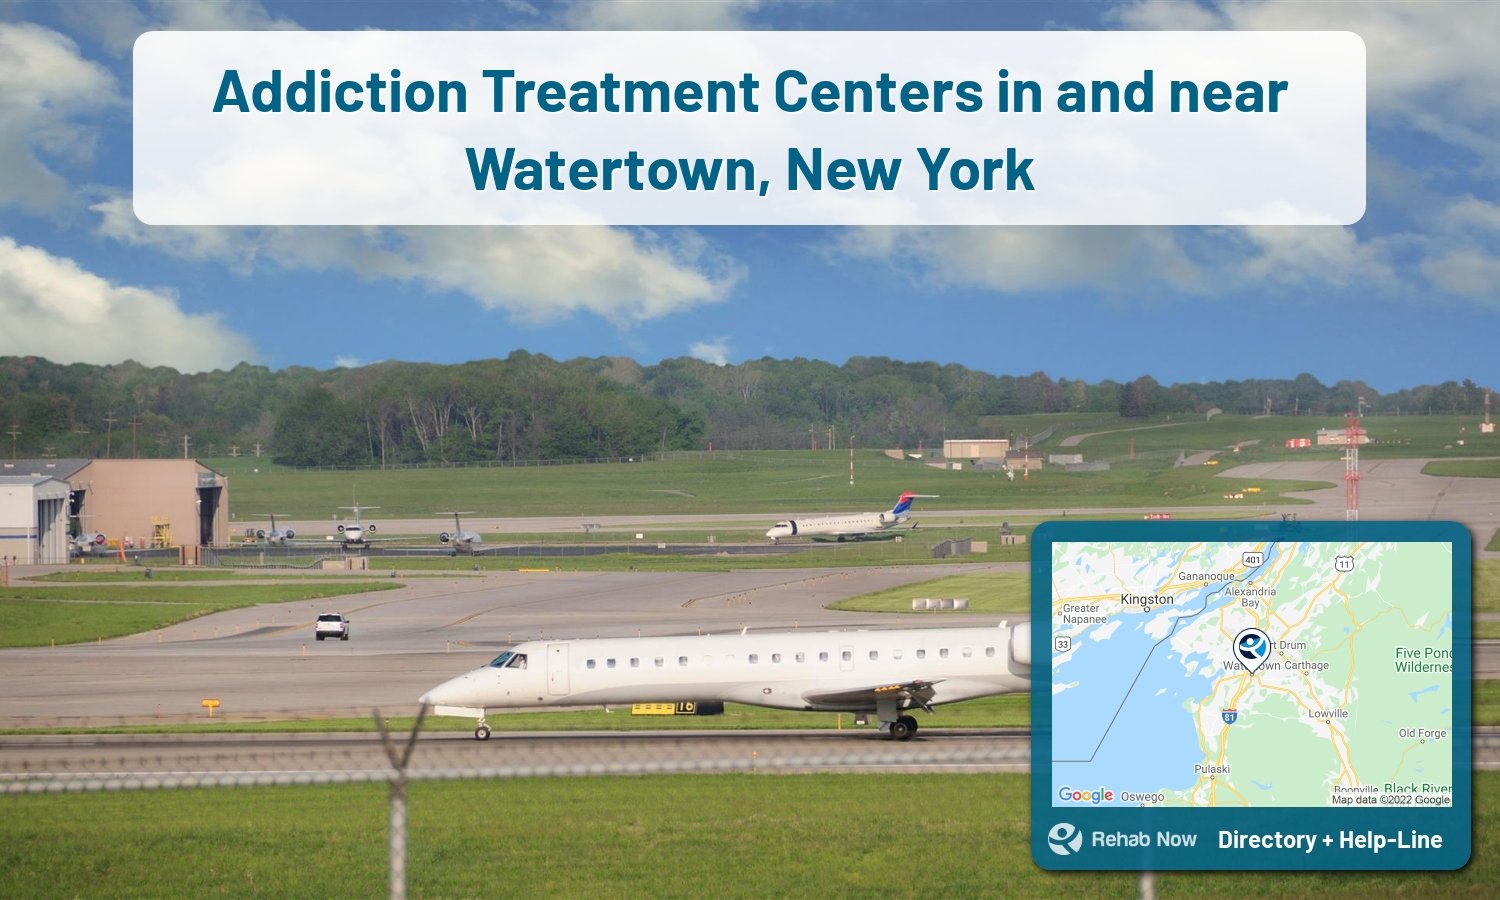 Watertown, NY Treatment Centers. Find drug rehab in Watertown, New York, or detox and treatment programs. Get the right help now!